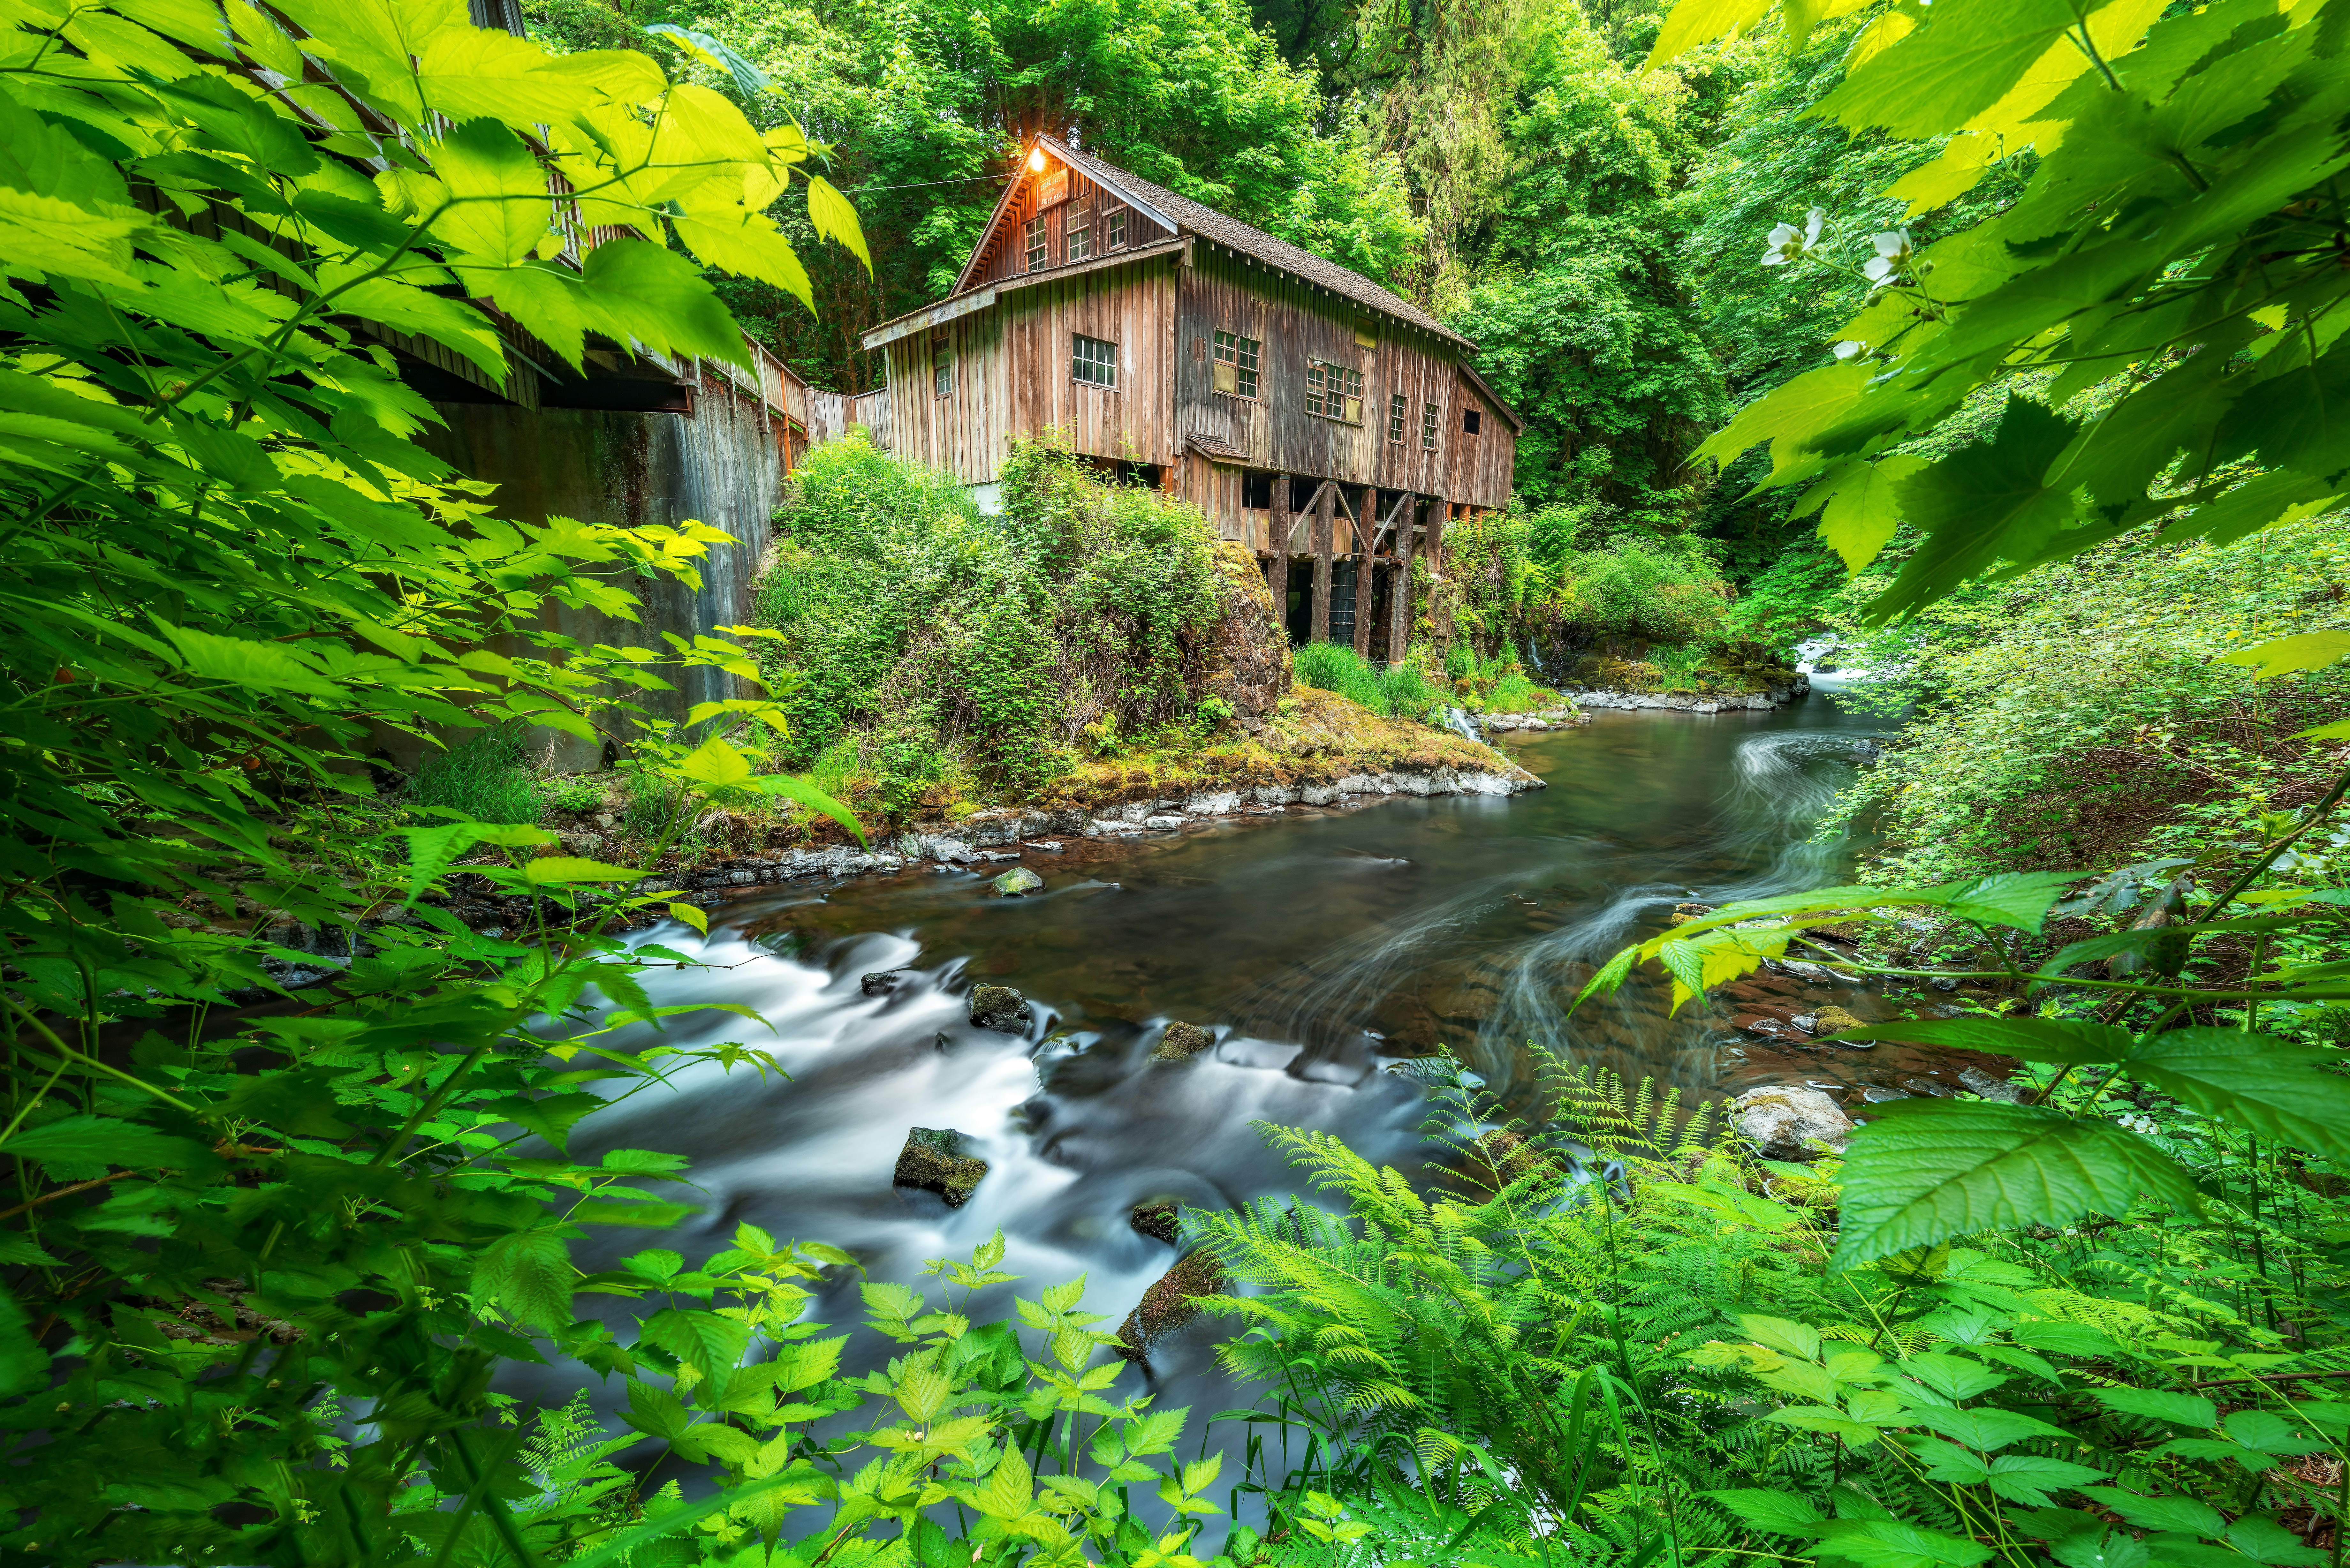 The Cedar Creek Grist Mill is a historical grist mill located in Woodland, Washington listed on the National Register of Historic Places. The mill was built in 1876 by George W. Woodham family and A.C. Reid.